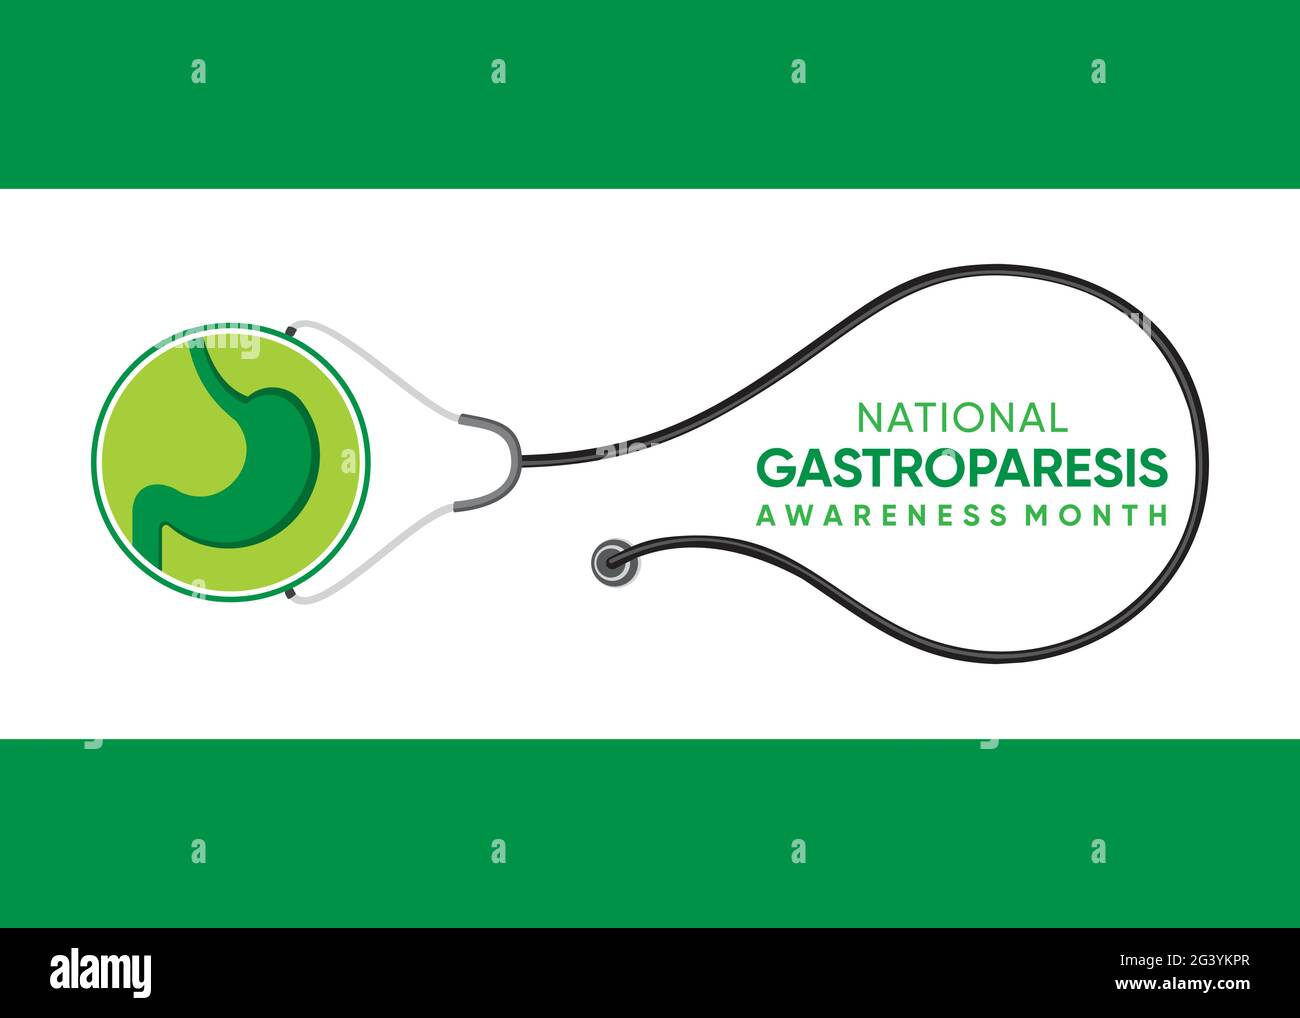 Vector illustration of Gastroparesis awareness month in each year during August. Stock Vector